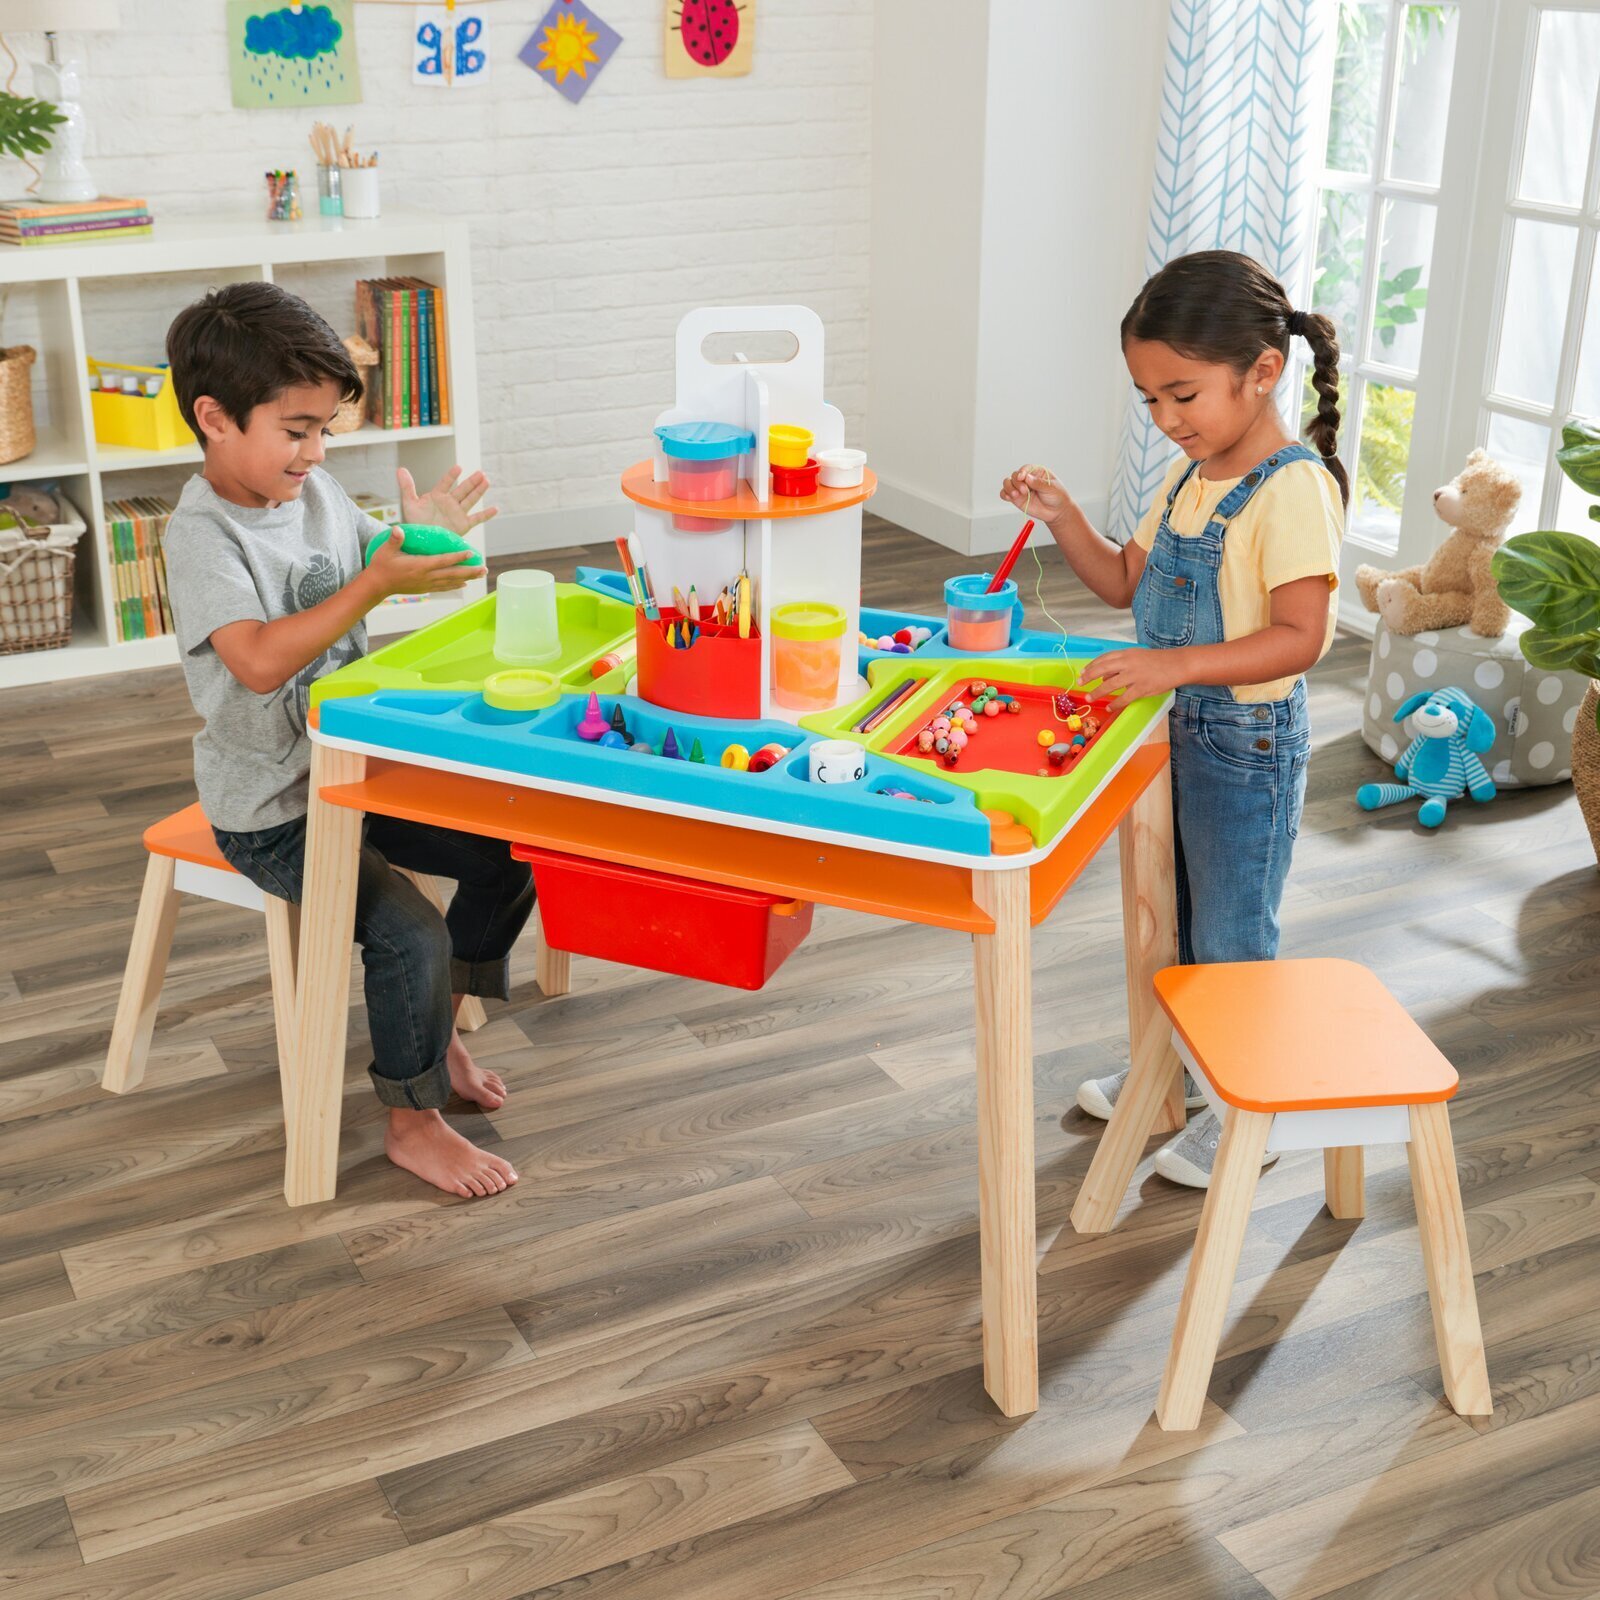 Kids Rectangular Arts And Crafts Table With Rotating Tower And Chair Set